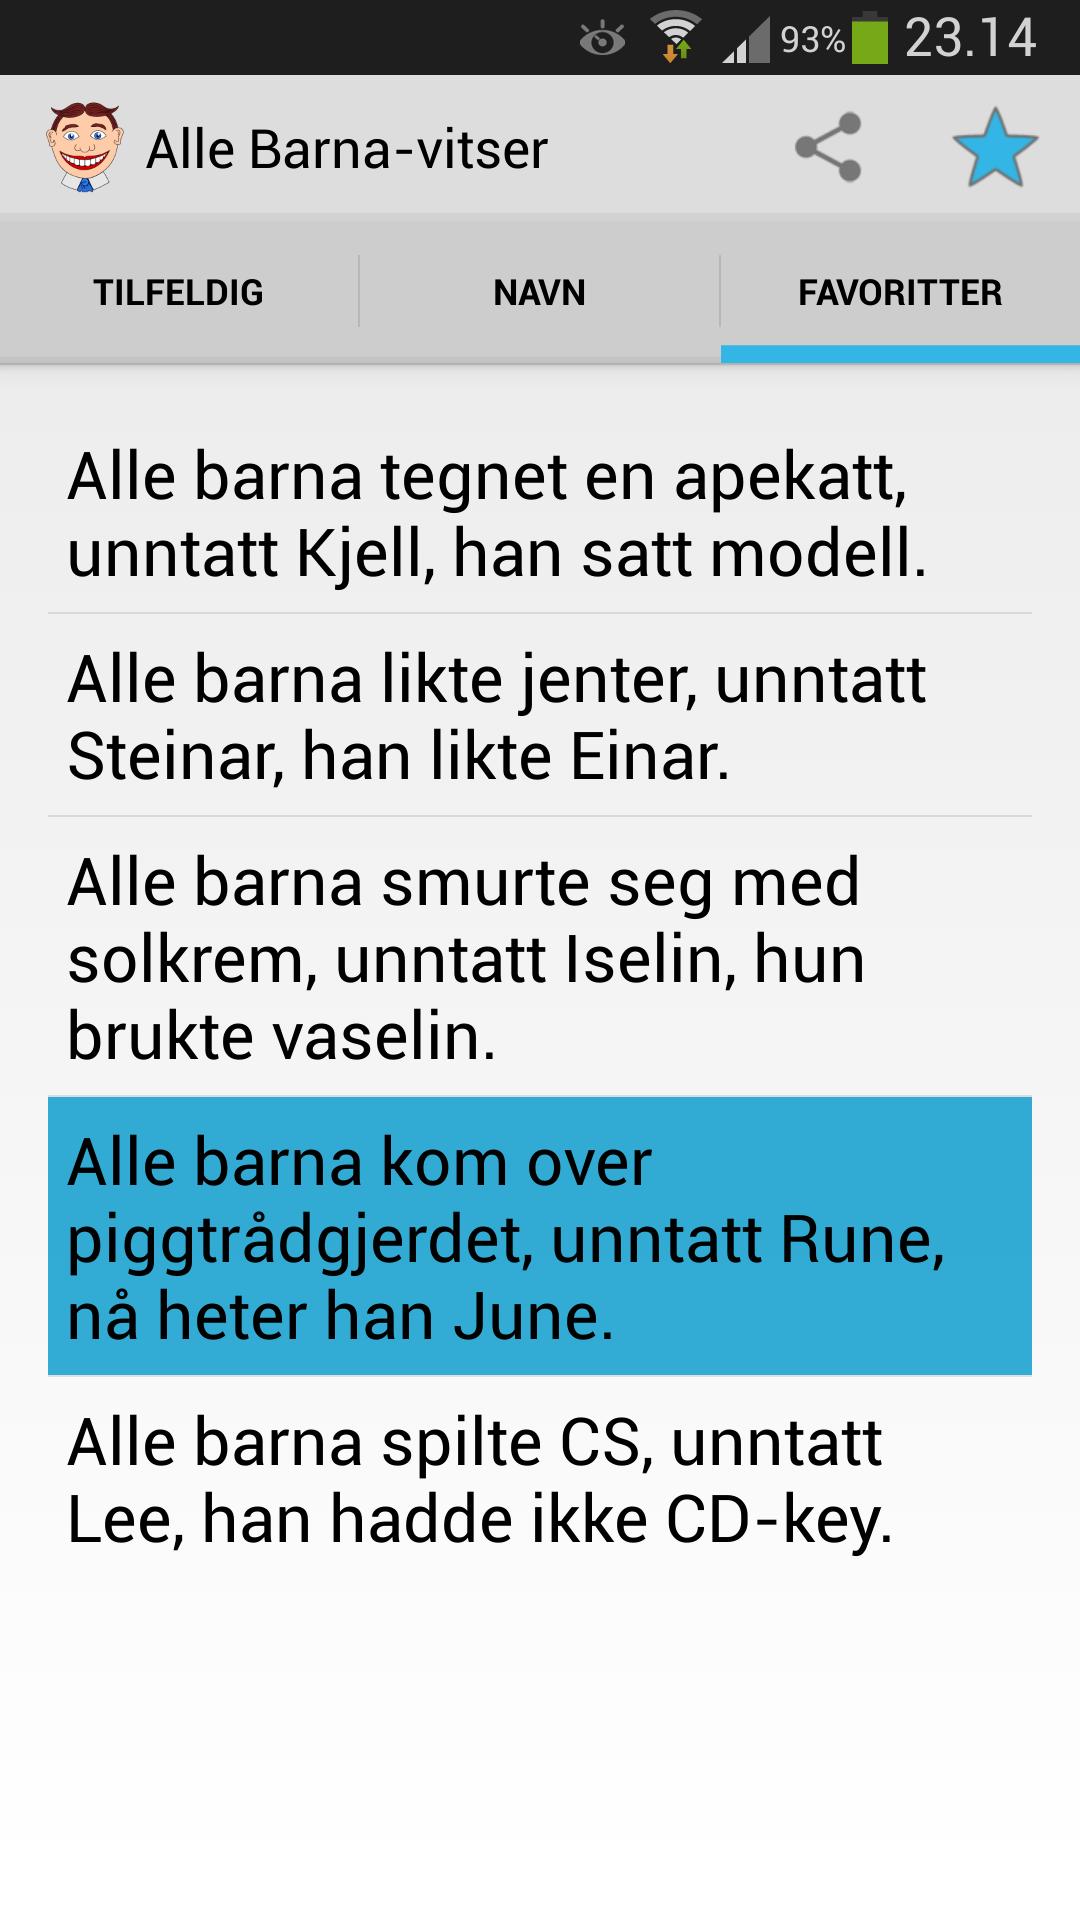 Alle Barna-vitser for Android - APK Download